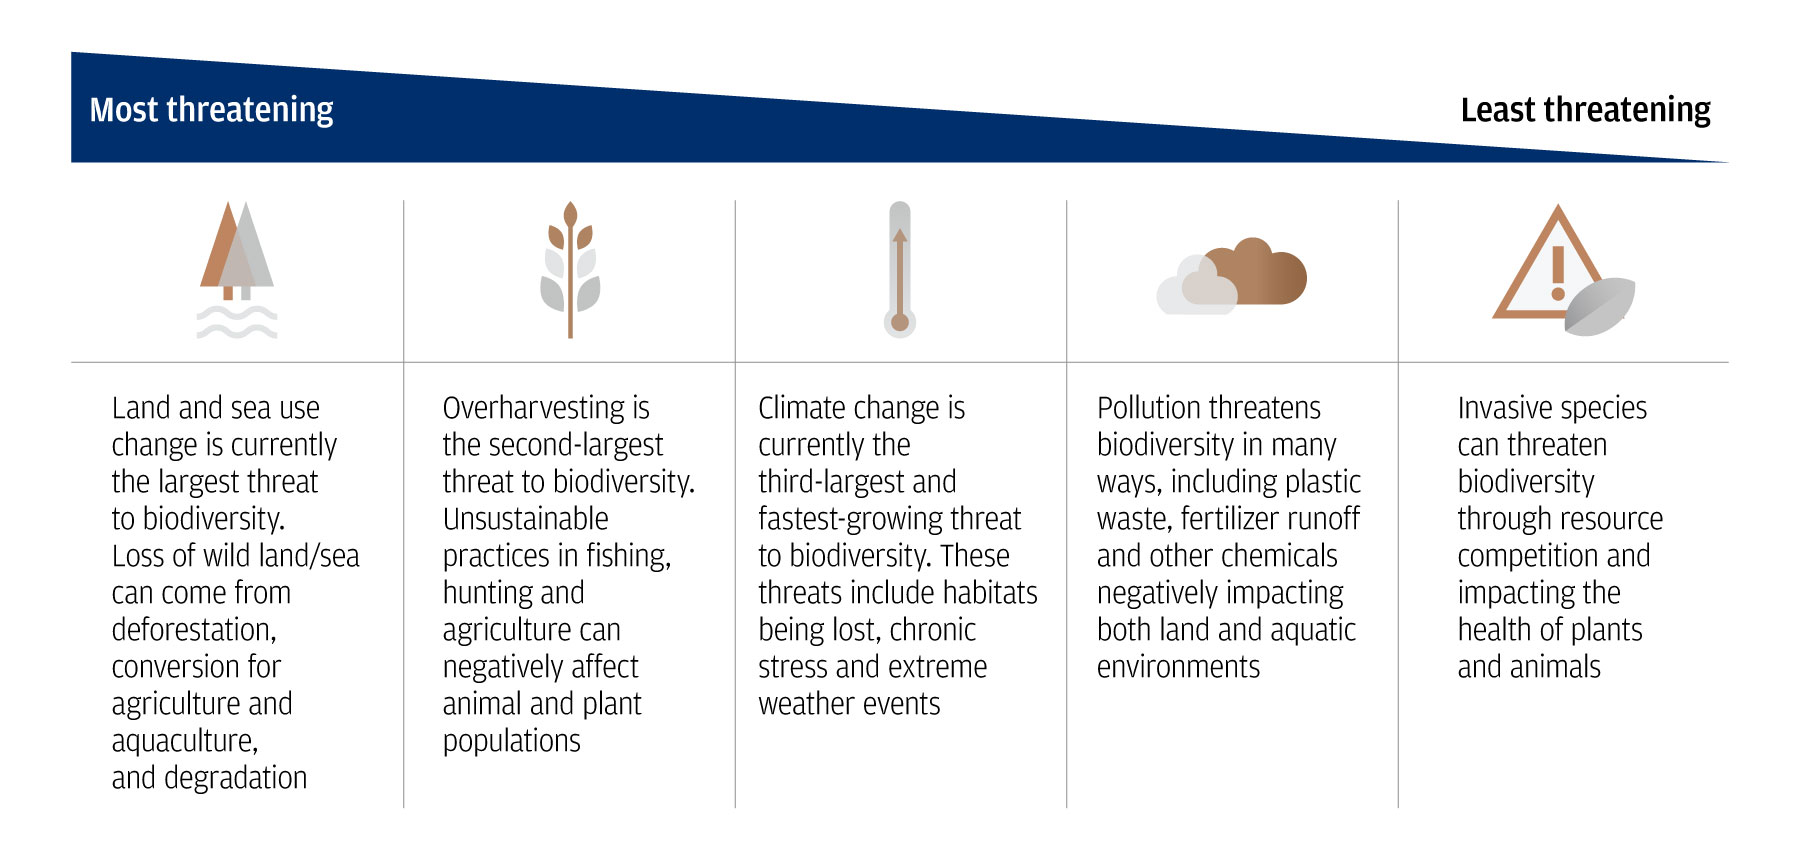 Five main threats to biodiversity are land and sea use change, overharvesting, climate change, pollution and invasive species.